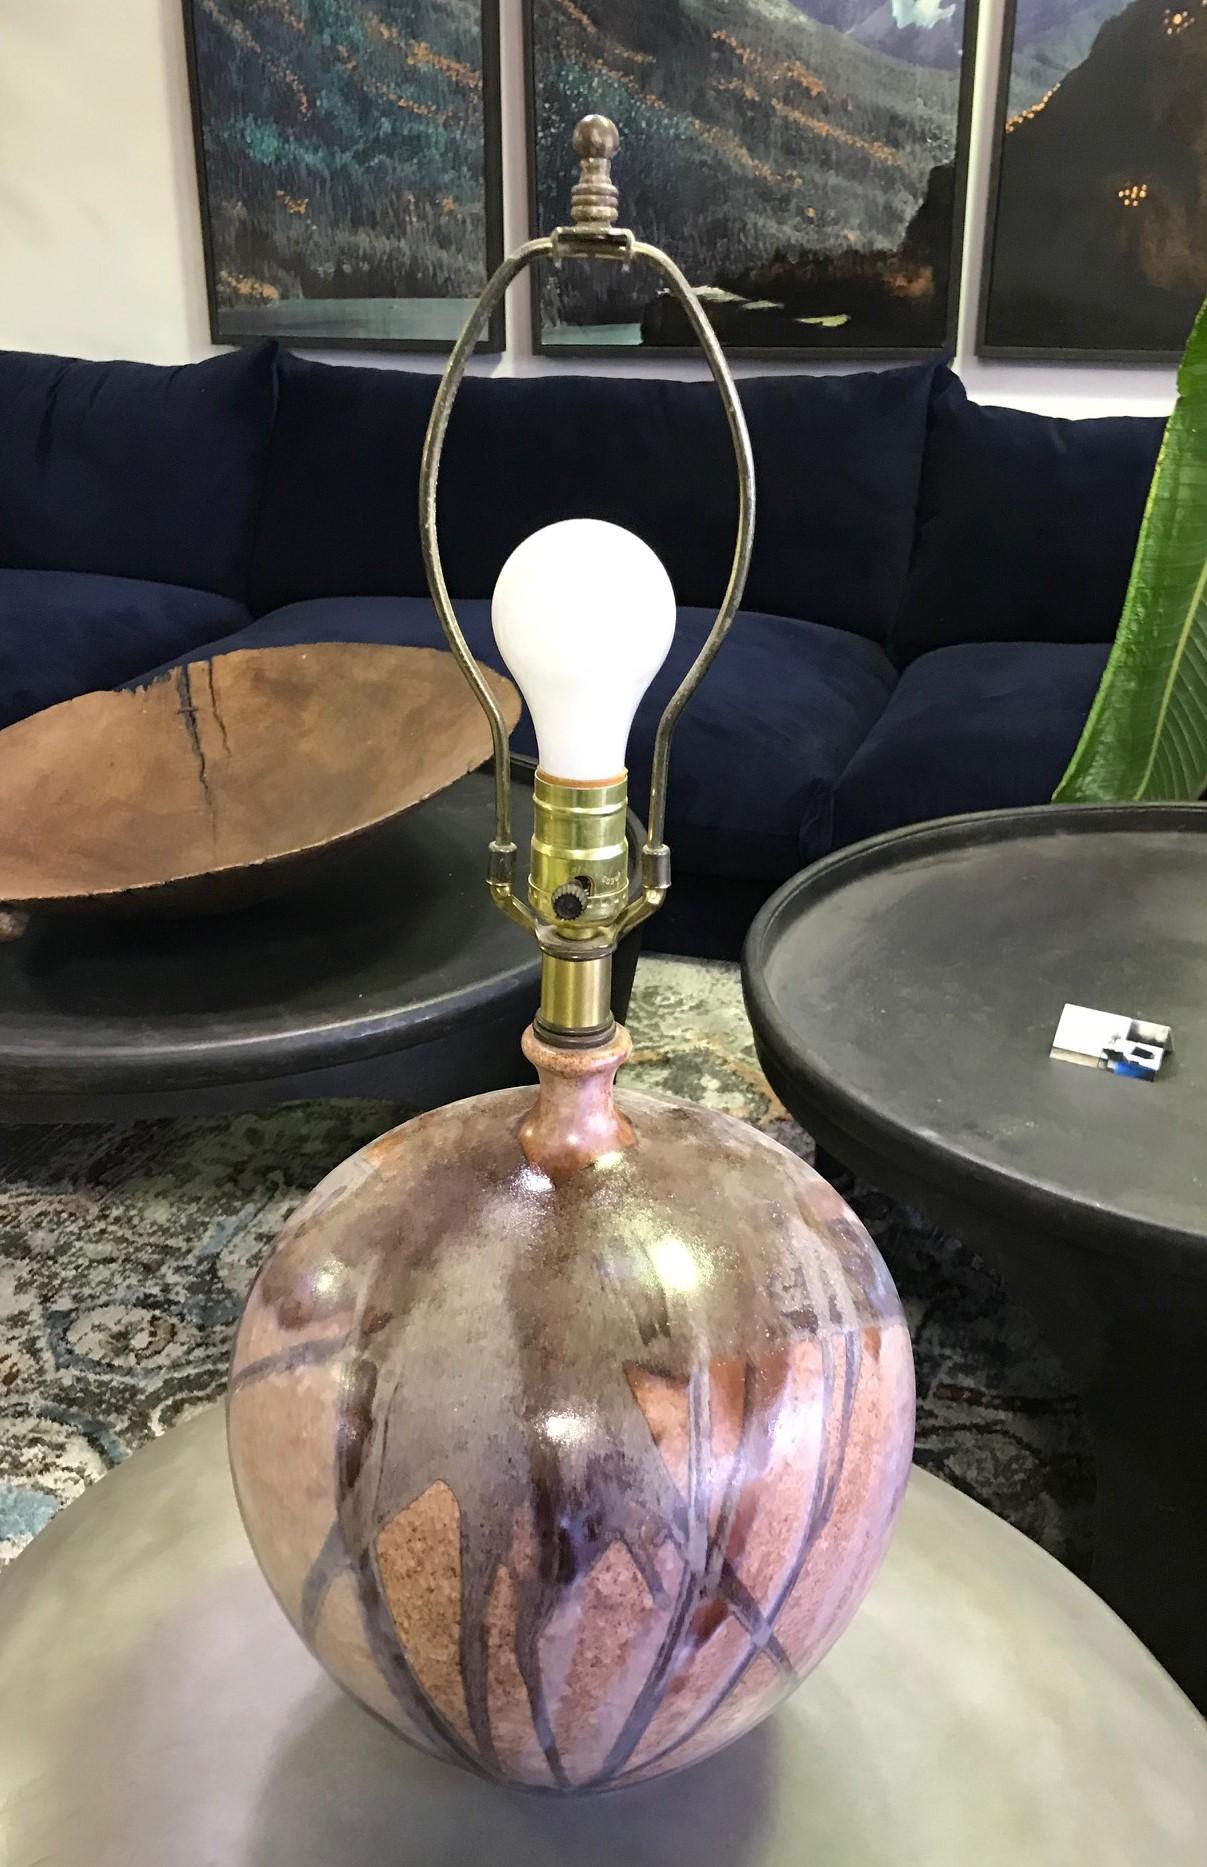 A fantastic piece, beautifully colored and designed. Caught our eye right away.

Would stand out in about any setting, modern or otherwise.

Comes as shown. Needs lamp shade.

Dimensions: 25